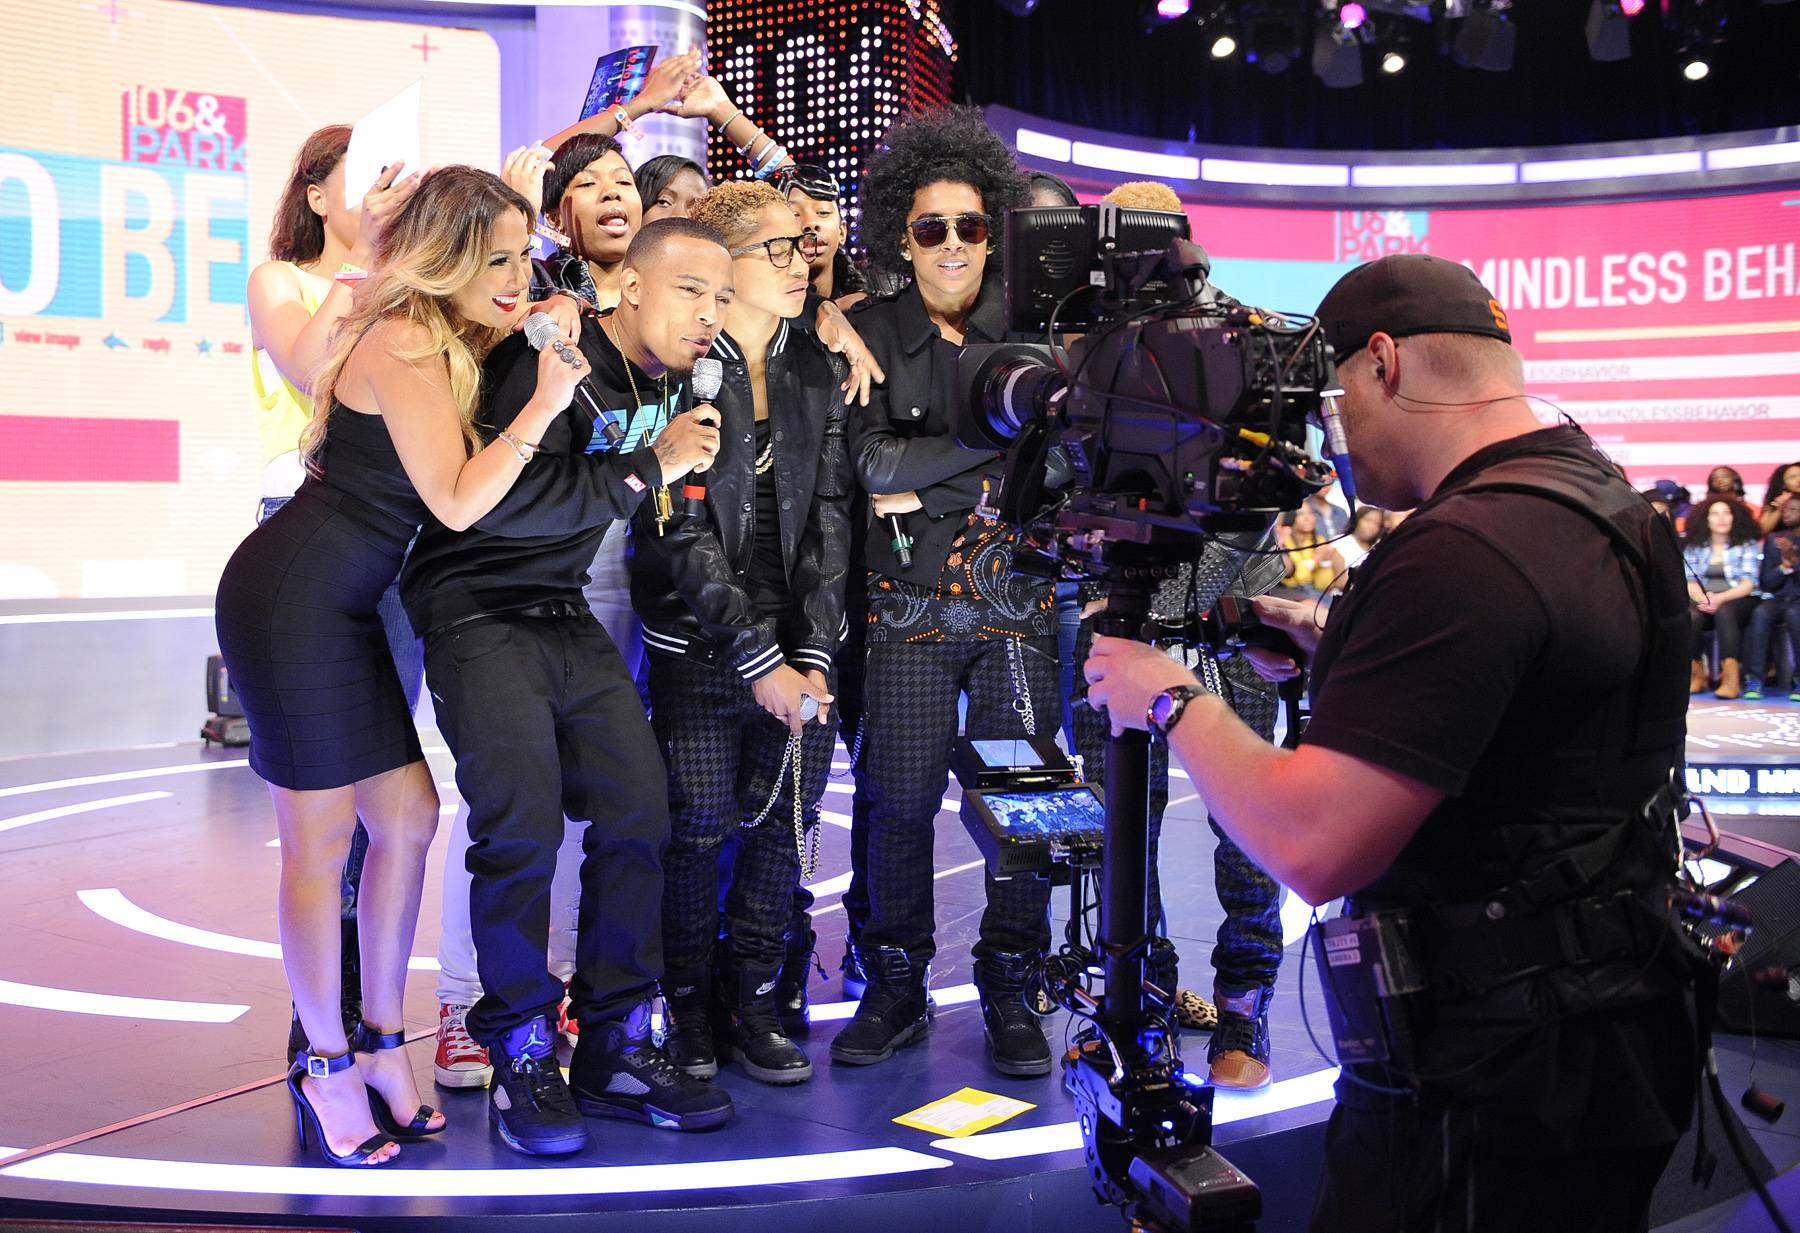 Wildin' Out - Bow Wow, Adrienne Bailon and Mindless Behavior at 106 &amp; Park, June 10, 2013. (Photo: John Ricard / BET)